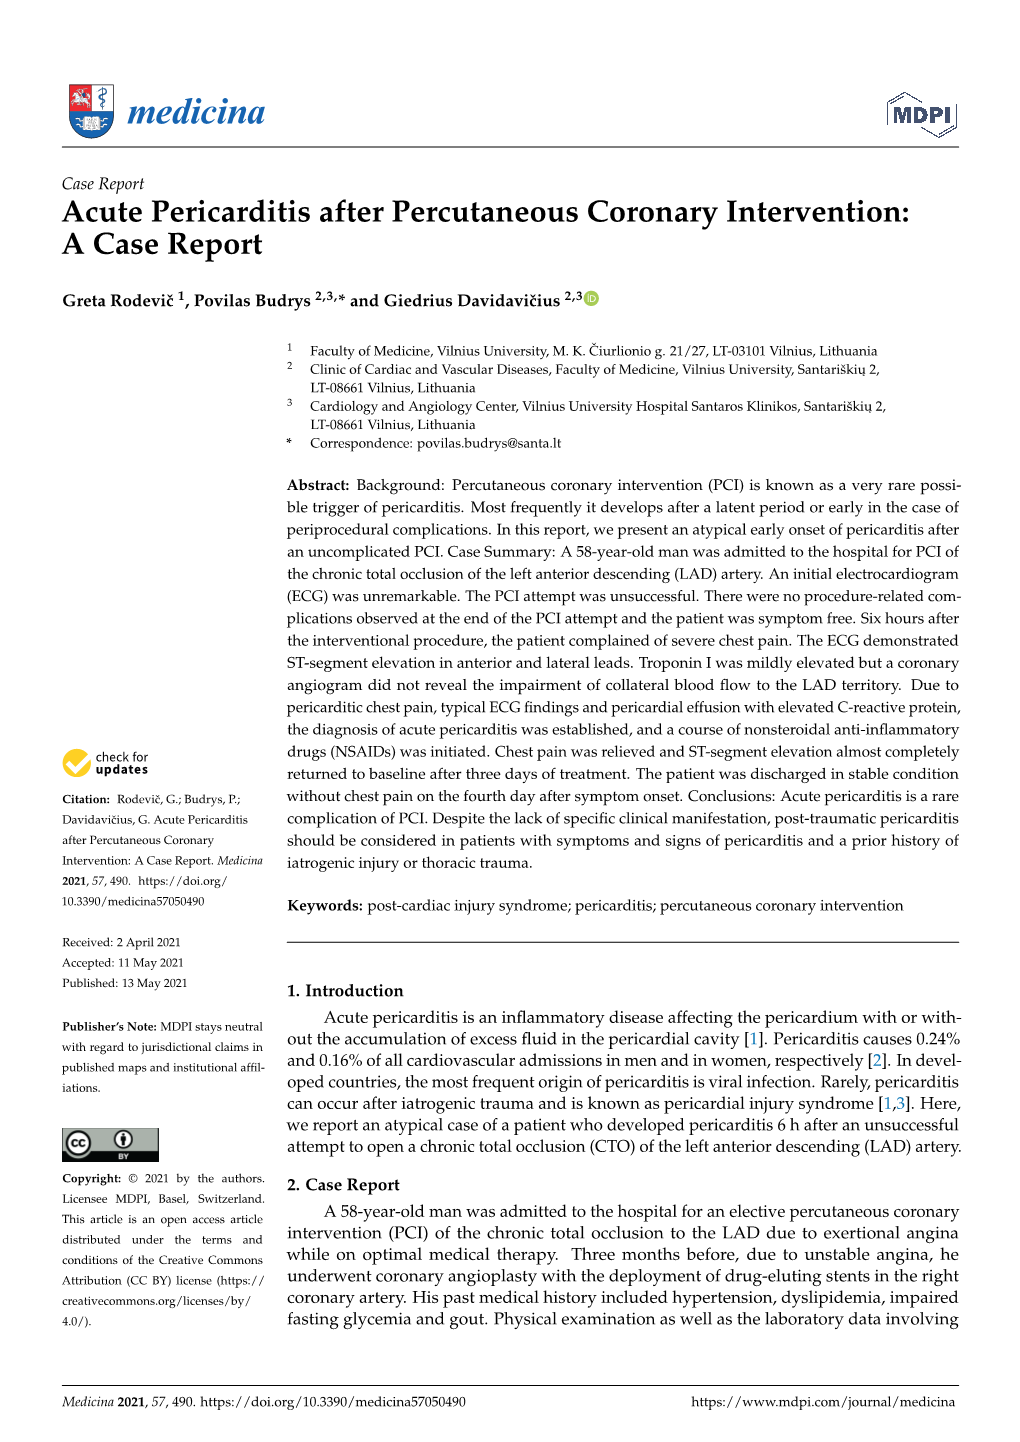 Acute Pericarditis After Percutaneous Coronary Intervention: a Case Report